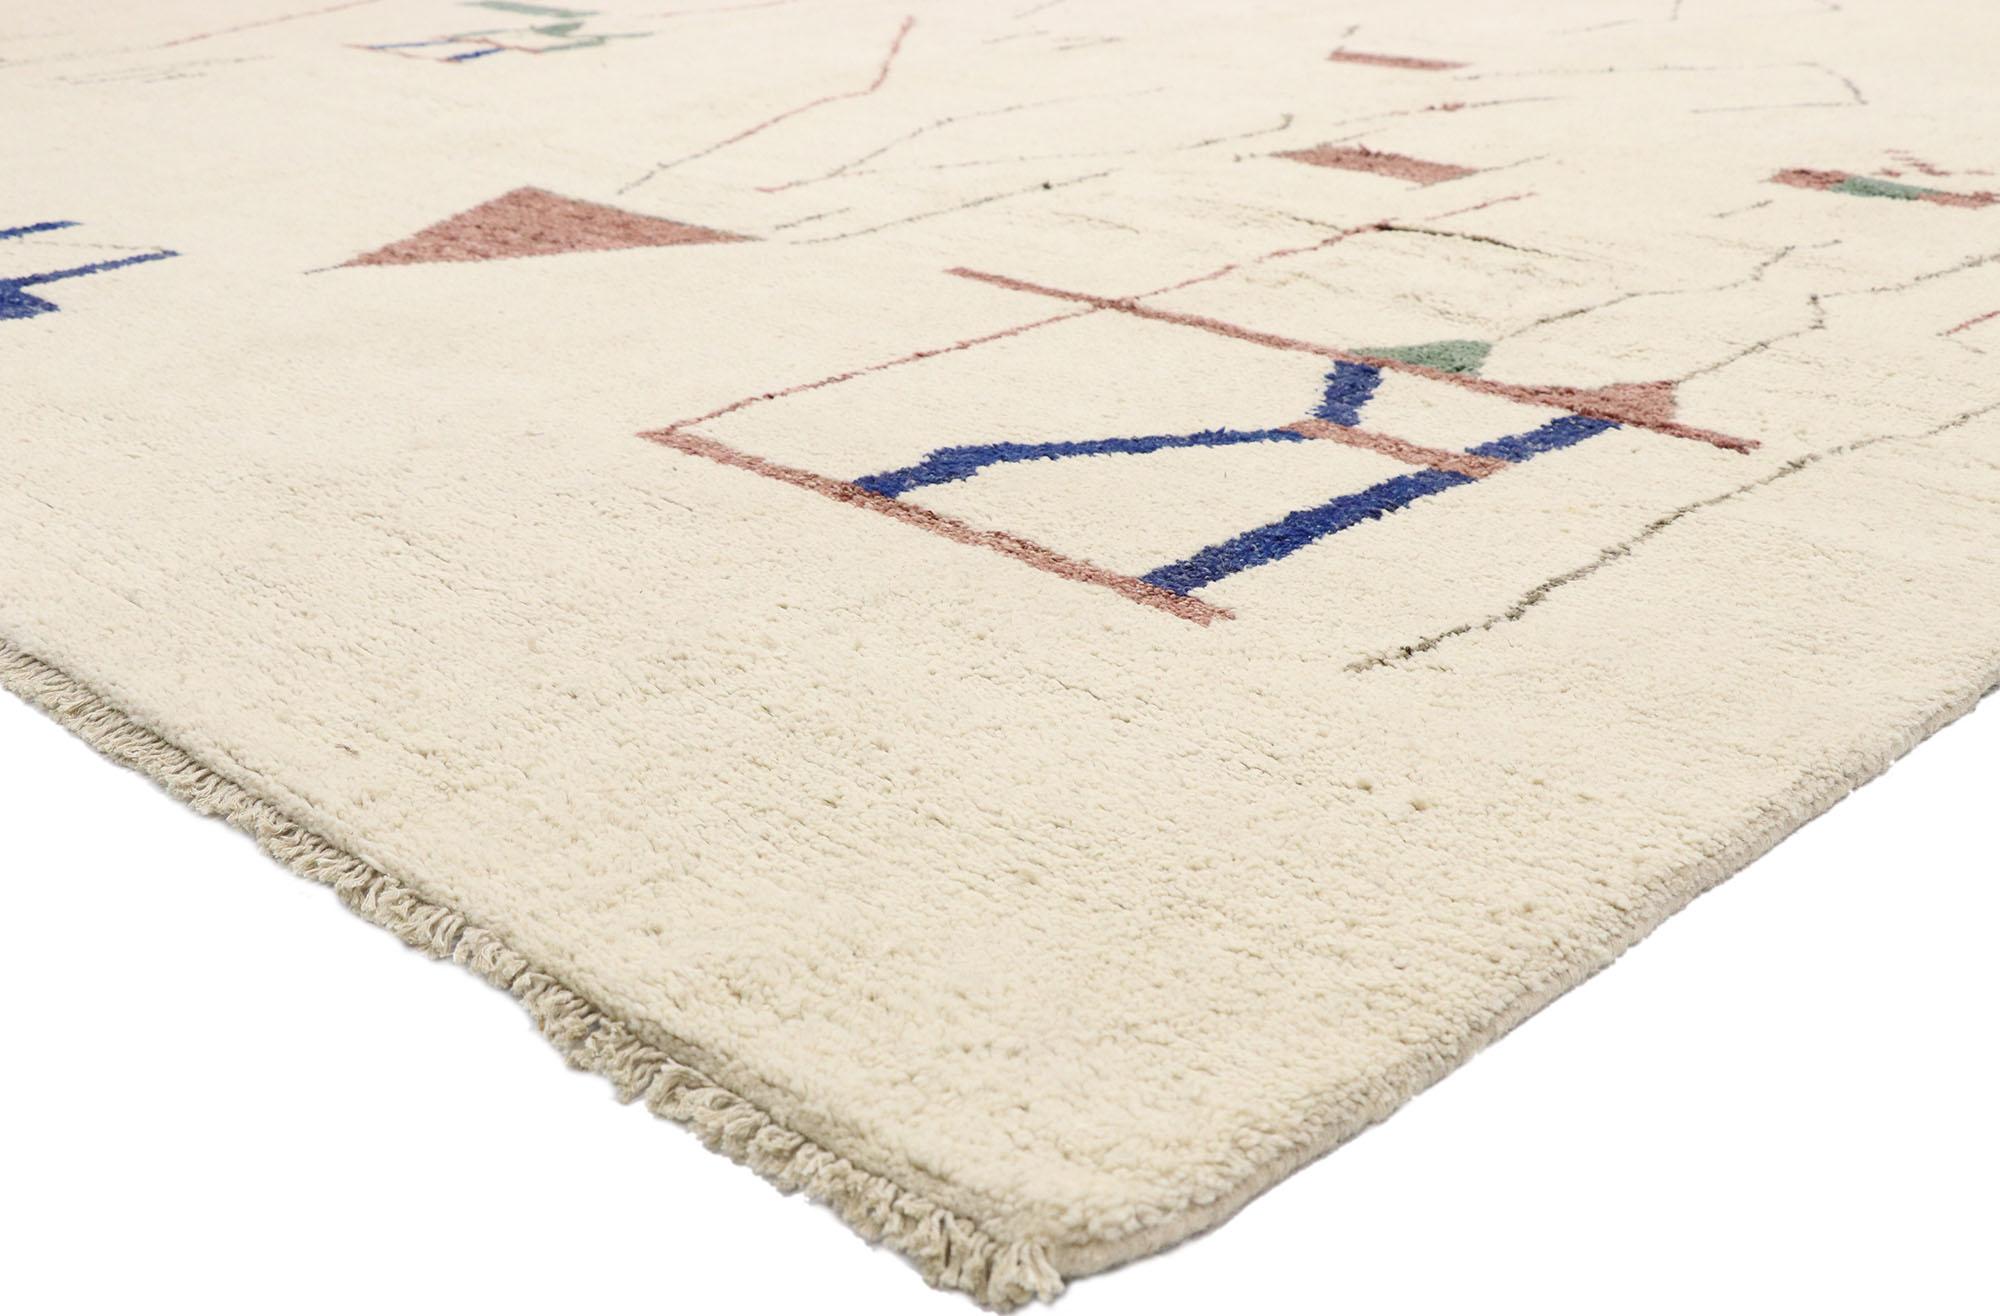 80545 Contemporary Oversized Moroccan Rug with Modern International Brutalist Style 12'00 x 15'08. Recalling the Brutalist, this contemporary oversized Moroccan rug is an amalgam of International style and the very definition of celebrated and